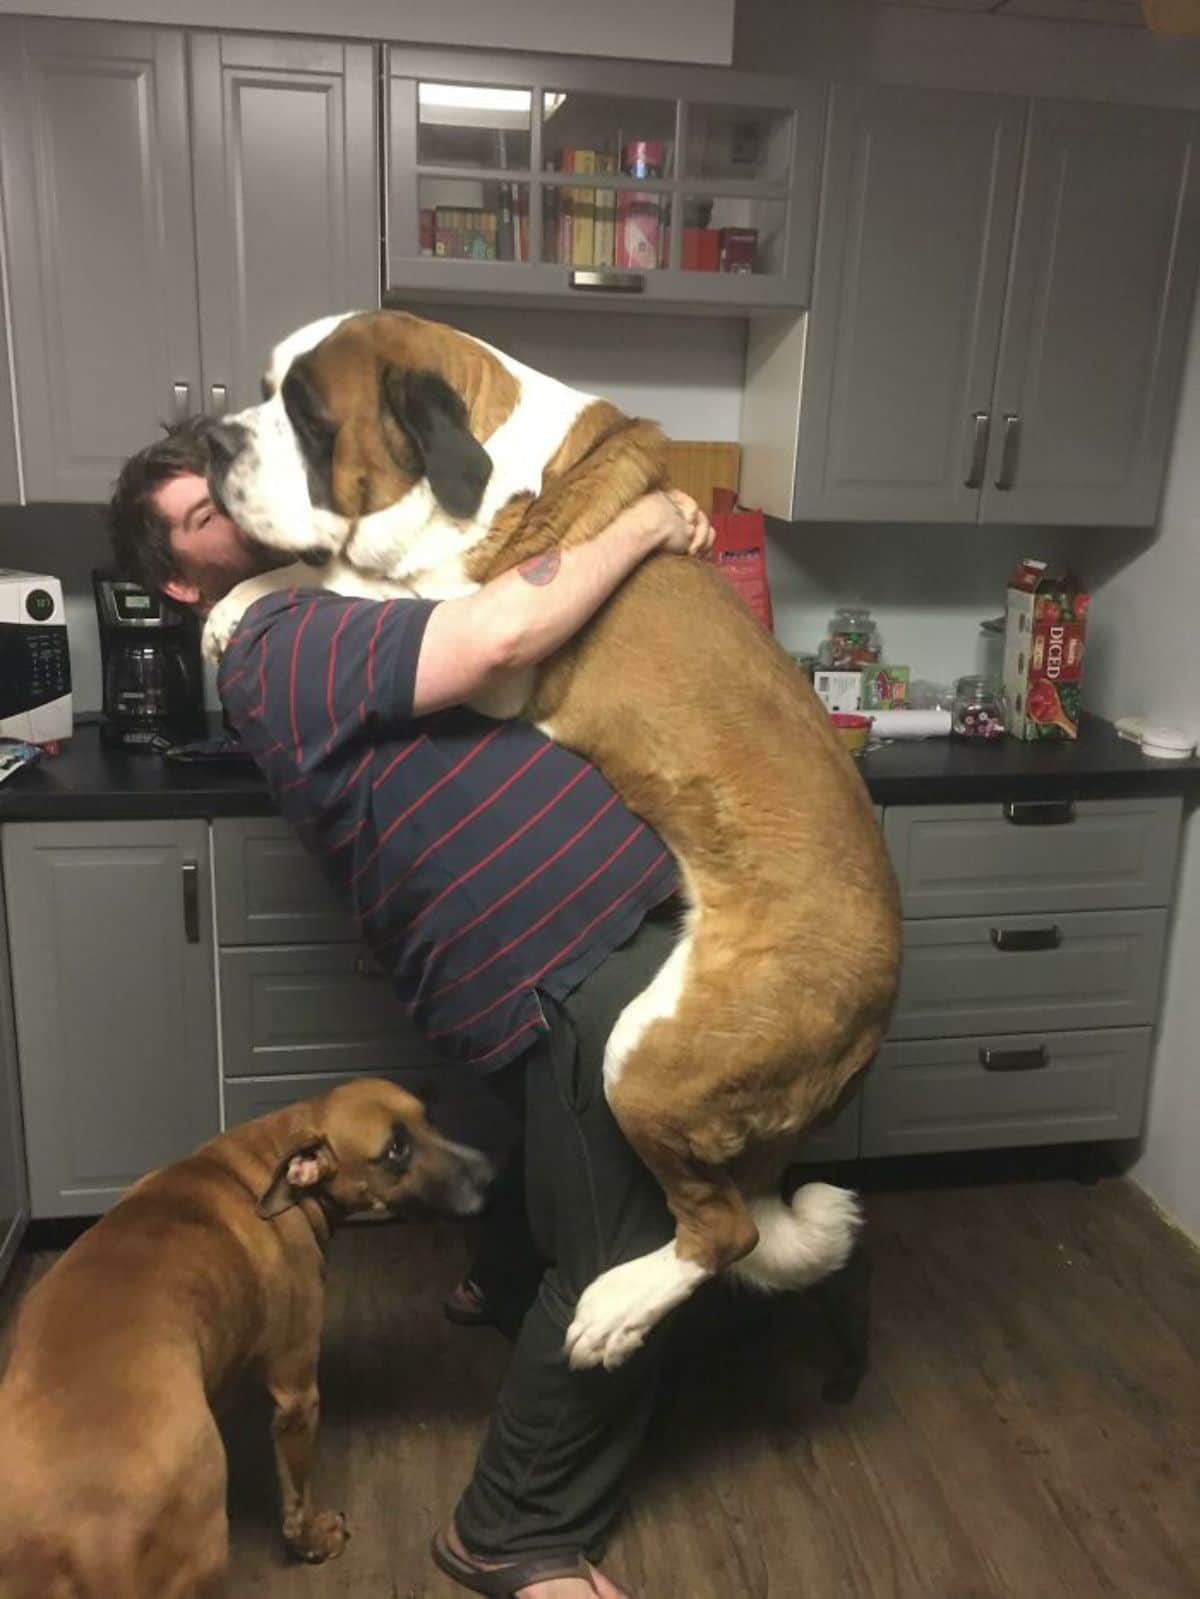 brown and white st bernard being held by a man with a brown dog standing on the floor behind him